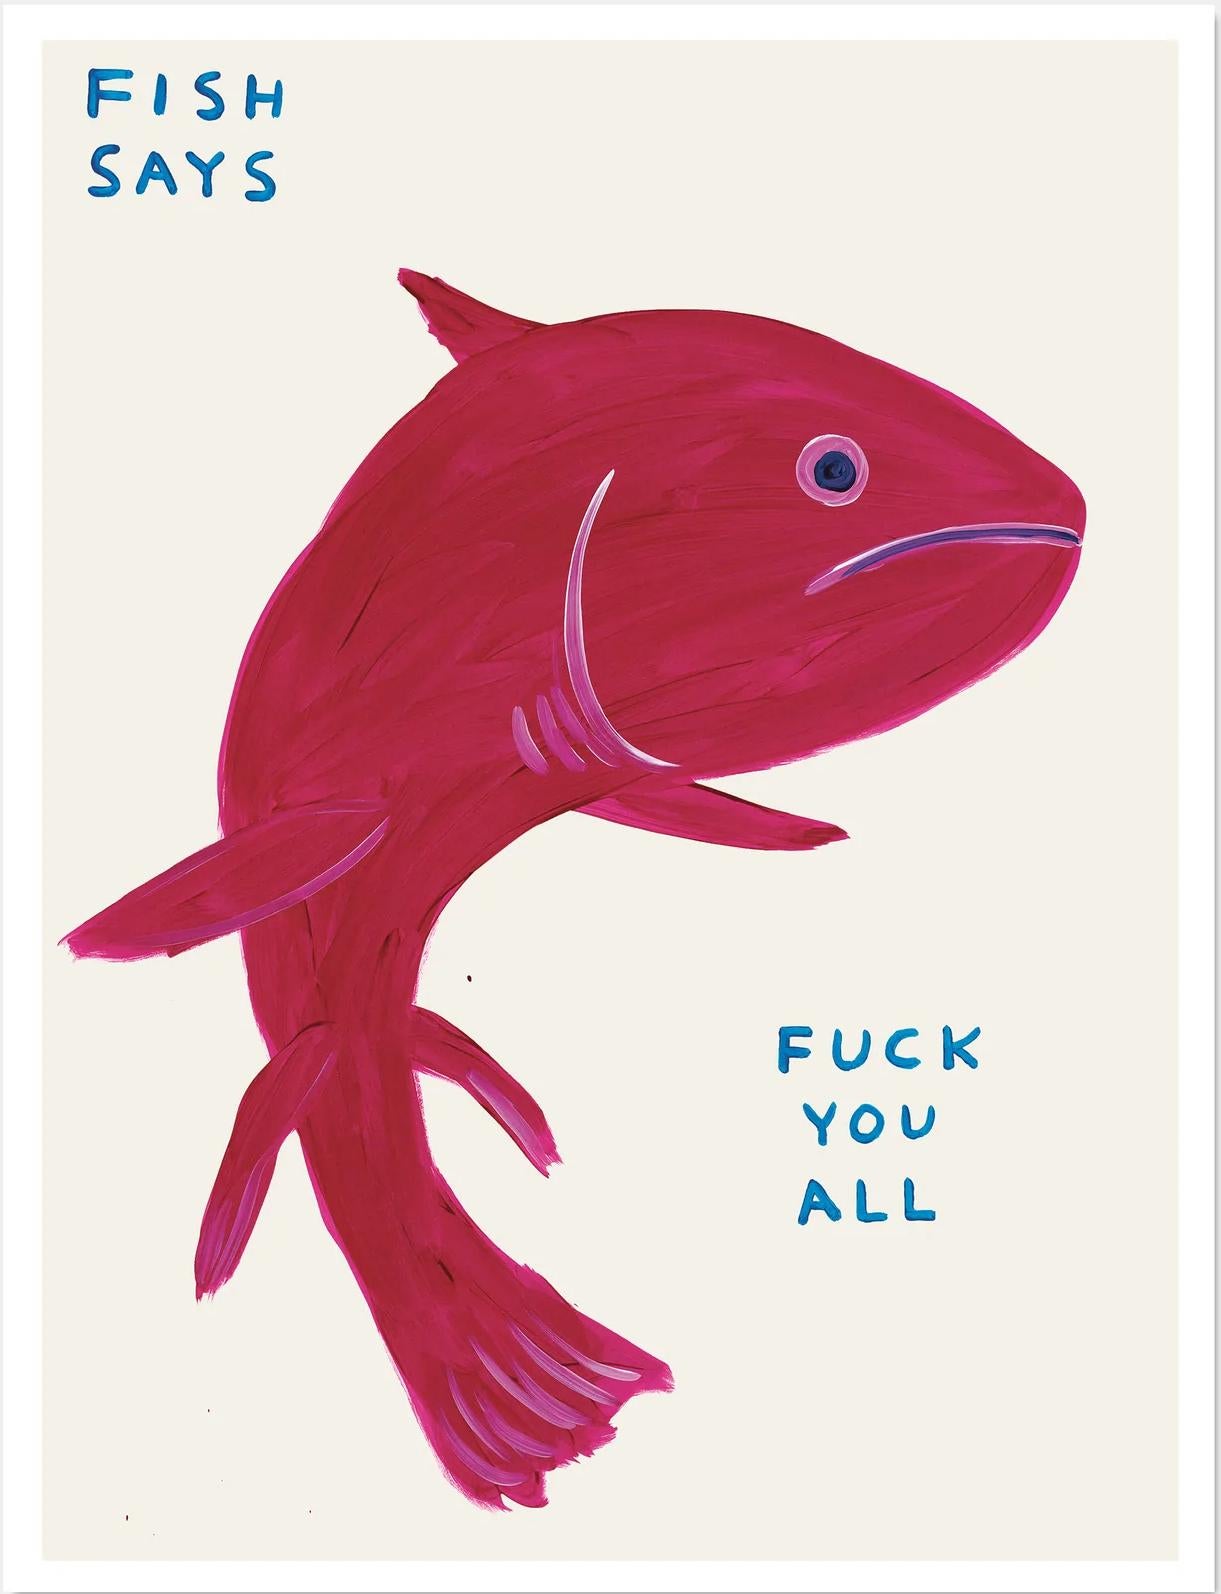 David Shrigley (English b. 1968)
Fish Says Fuck You All, 2021
Off-set lithograph
Open edition, unframed
60 x 80 cm (23.62 x 31.5 inches)
Printed on 200g Munken Lynx paper by Narayana Press in Denmark

This print is based on the original acrylic on